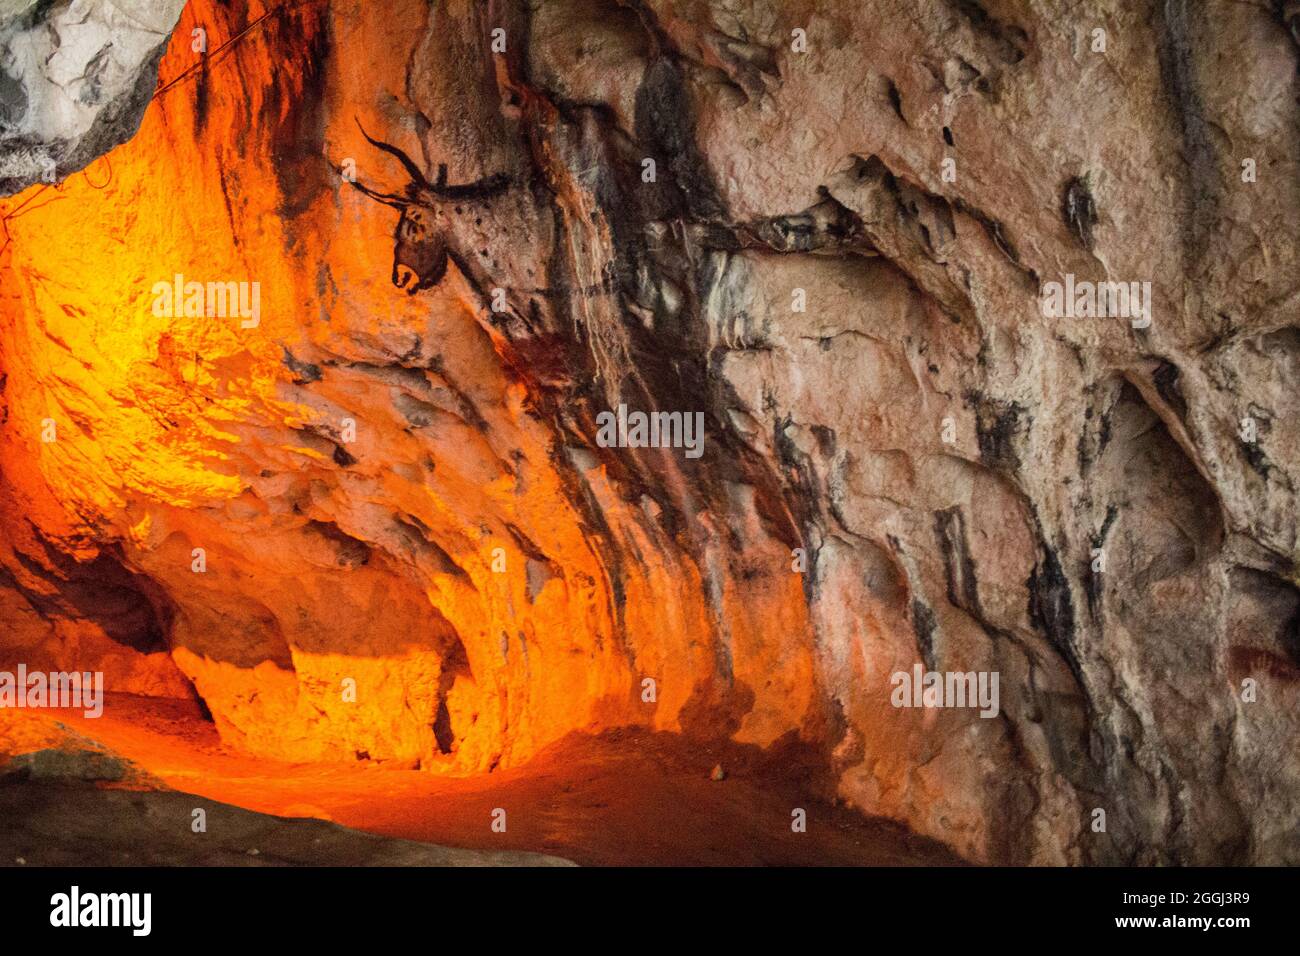 A painting, illustrating an aurochs, created during the prehistoric era, in a deep cave in Romania. Stock Photo